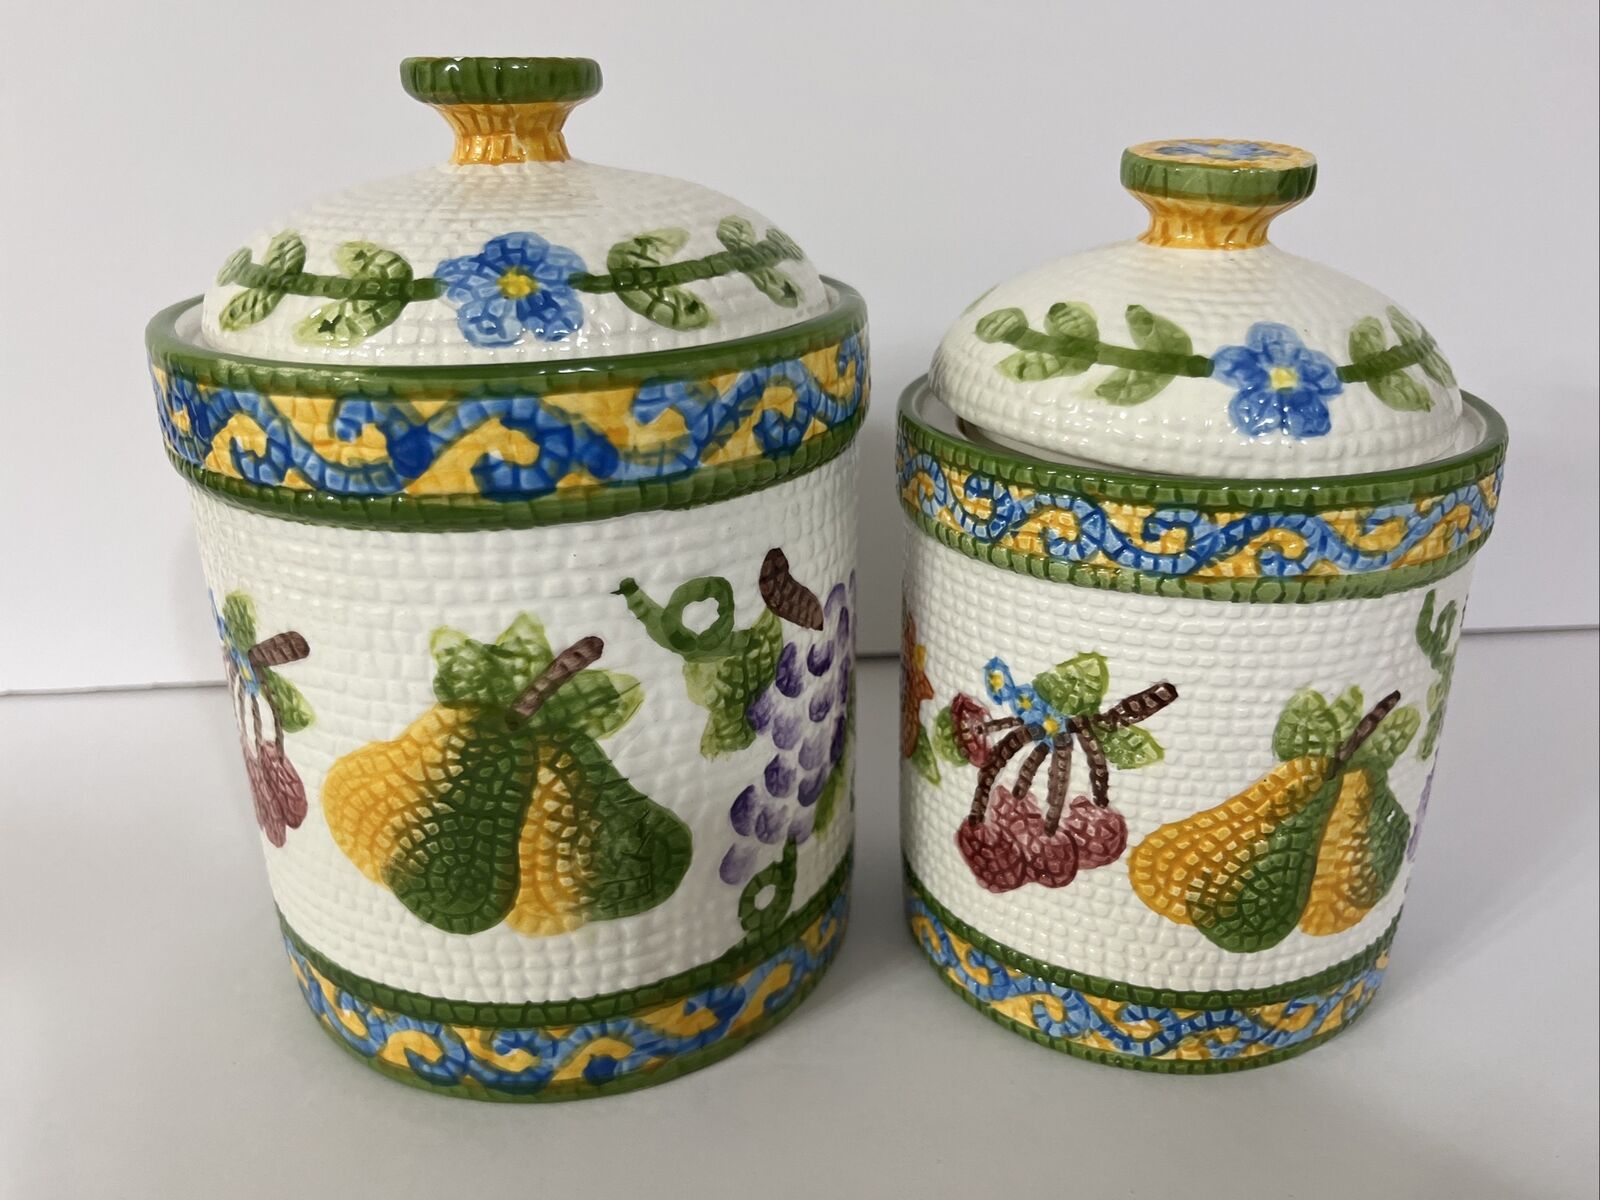 VTG 1997 Set Of 2 Canisters Jay Import Fruits Grapes Pears Apples  Mosaic Look